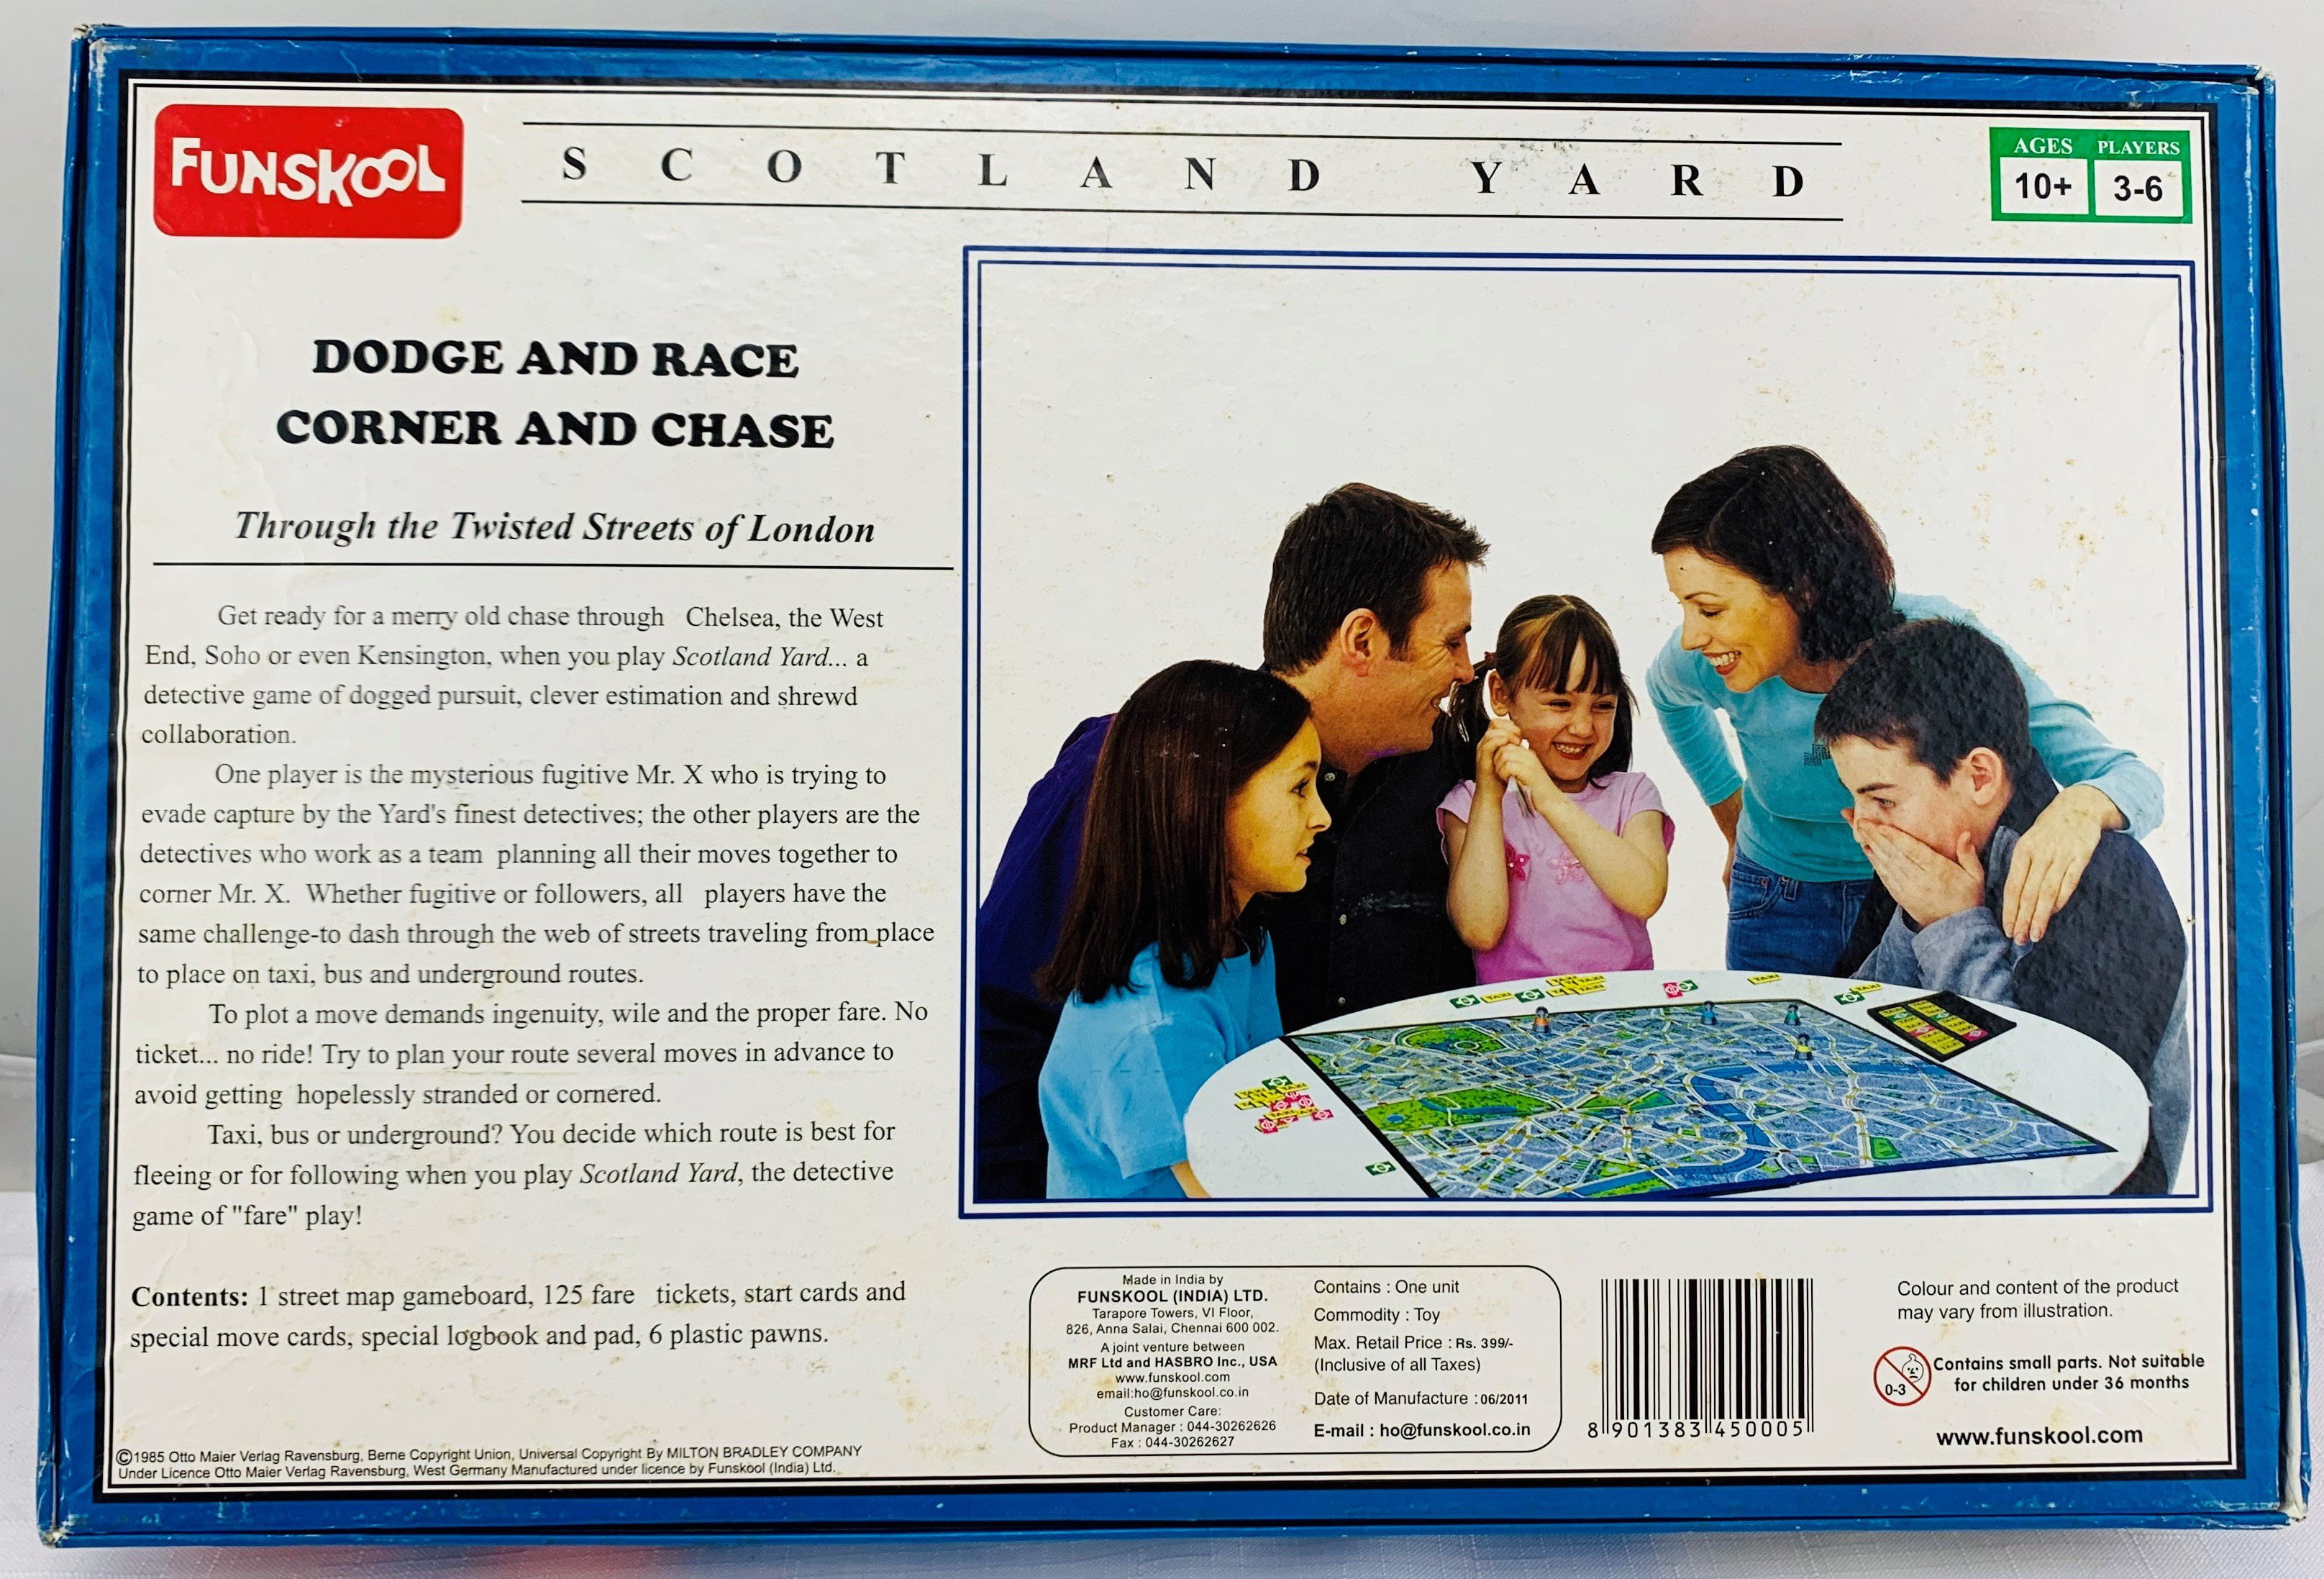 Scotland Yard Game by Funskool Complete in Great Condition FREE SHIP